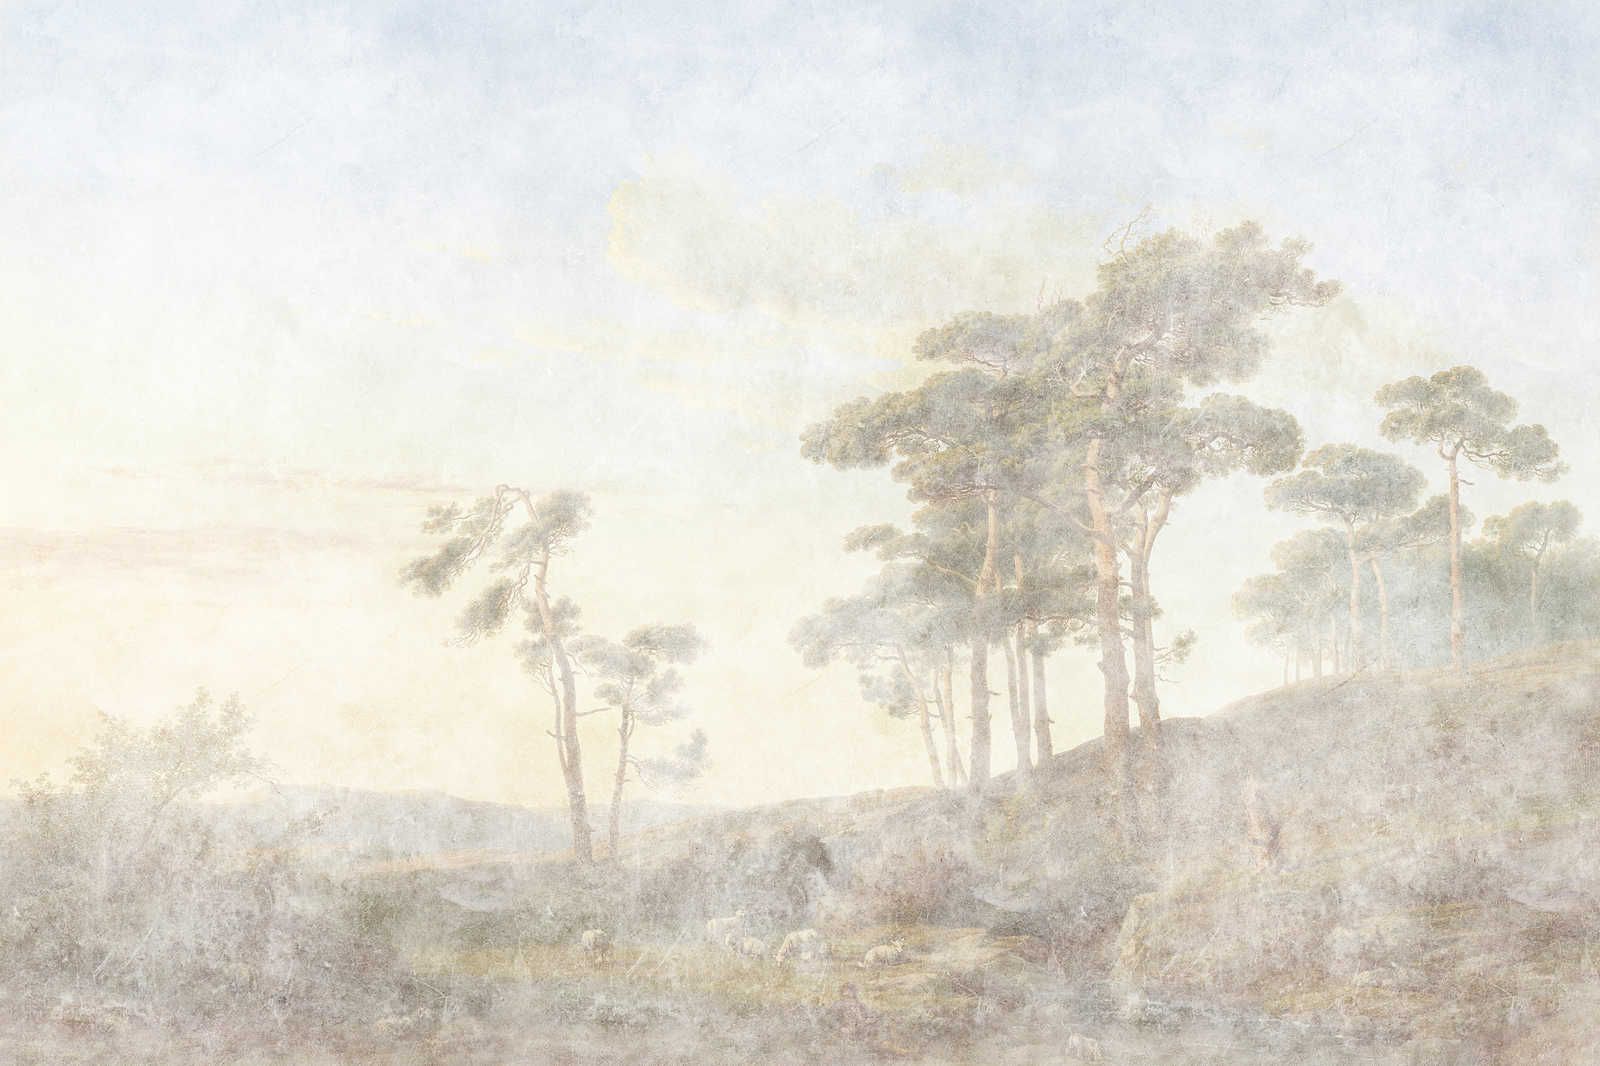             Romantic Grove 1 - Painting Canvas Faded Used Look - 0.90 m x 0.60 m
        